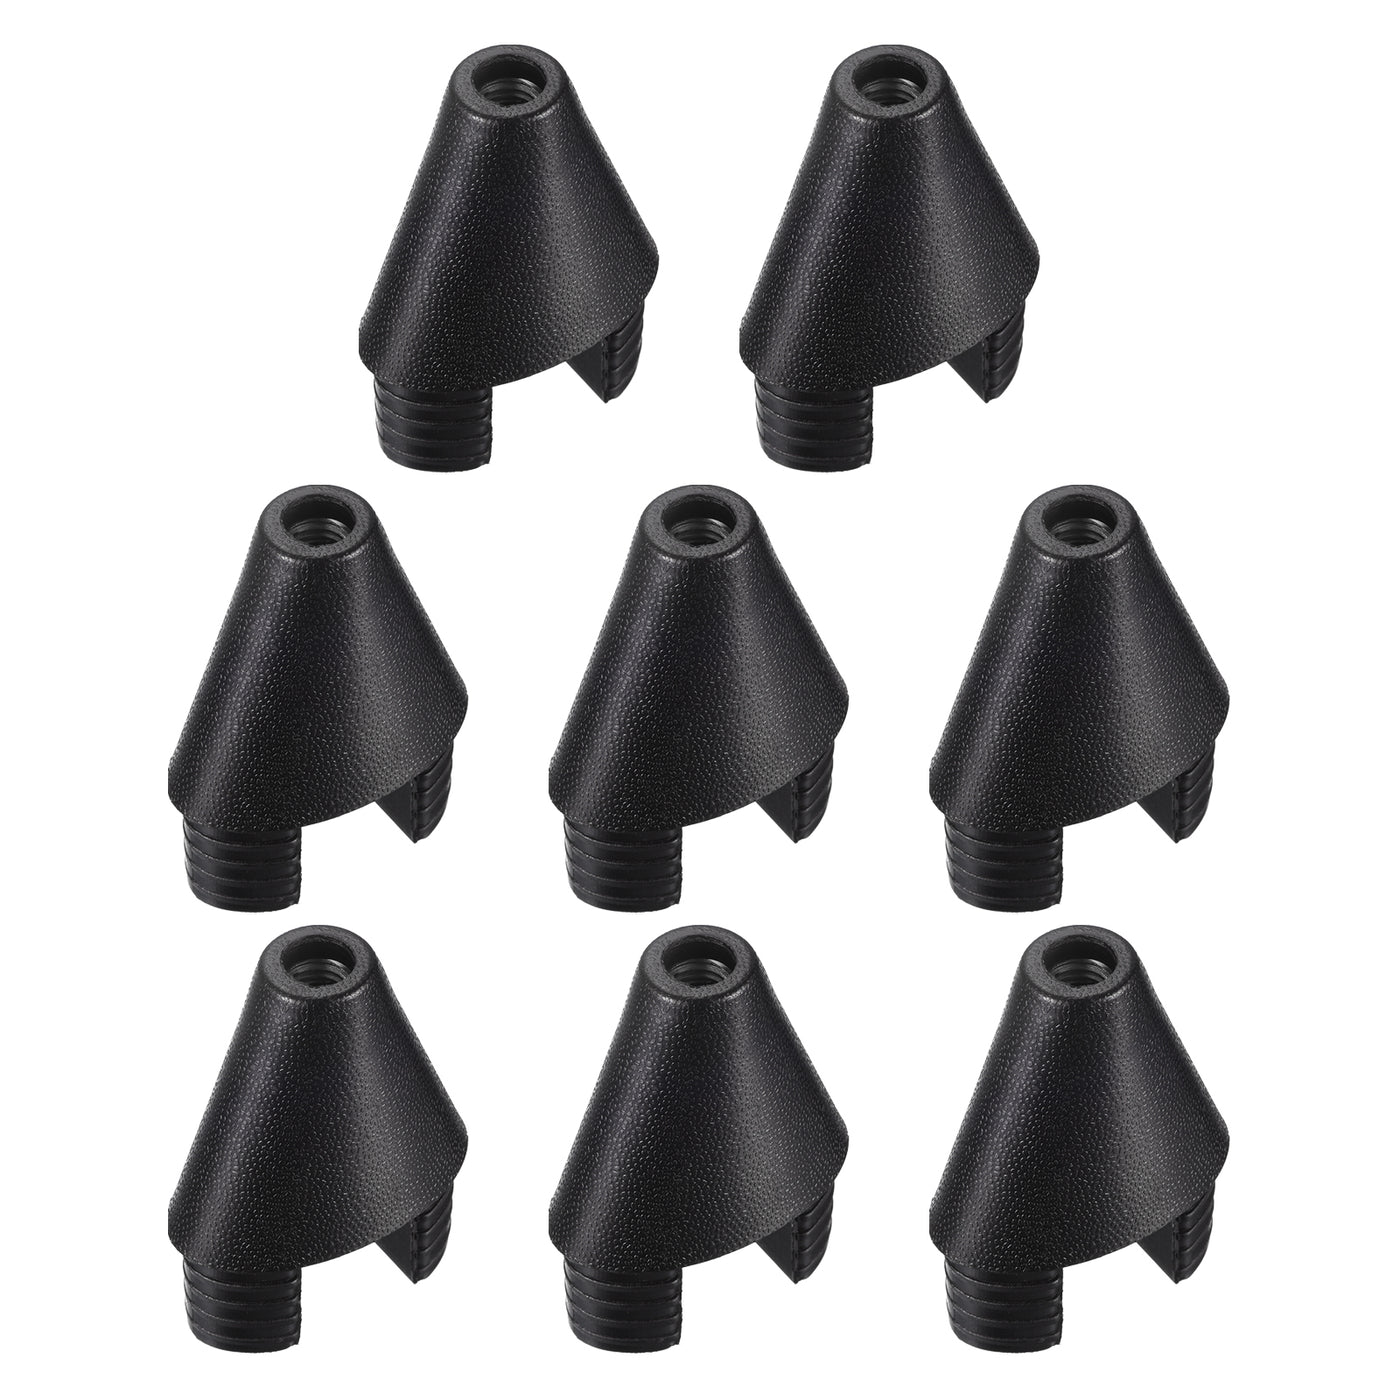 uxcell Uxcell 8Pcs 1.97"x1.18" Caster Insert with Thread, M10 Thread for Furniture